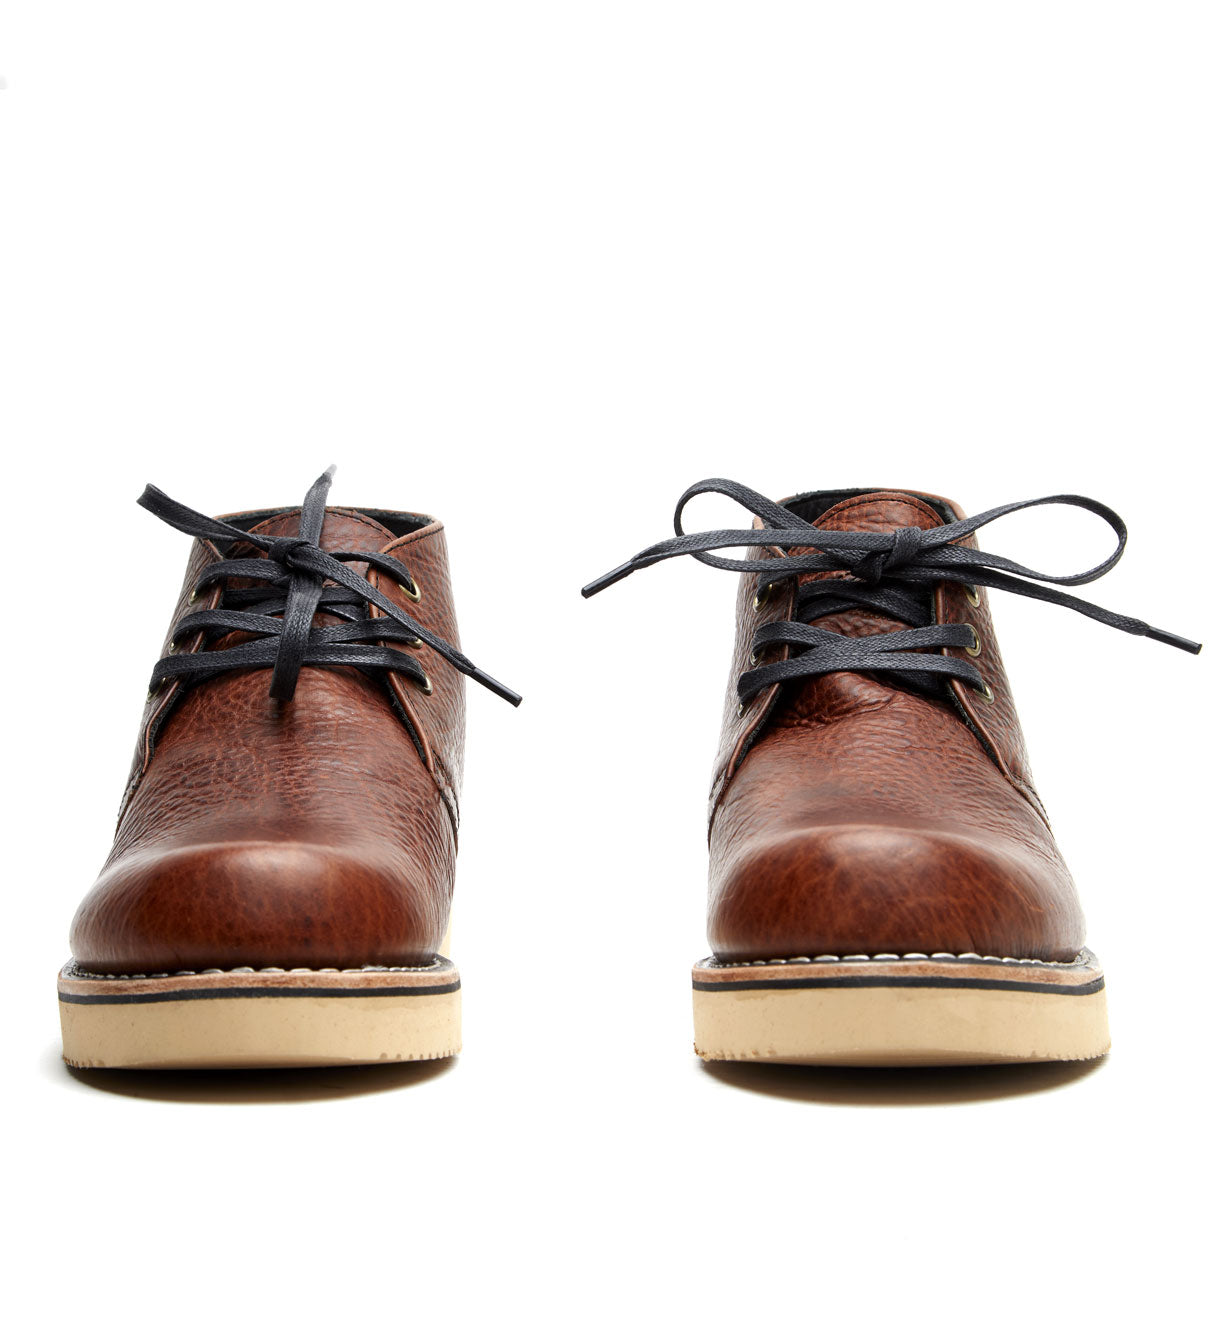 A pair of brown leather Santa Rosa Brand Union Cognac Bison Boots with black laces and a Vibram 2021 wedge outsole, on a white background.